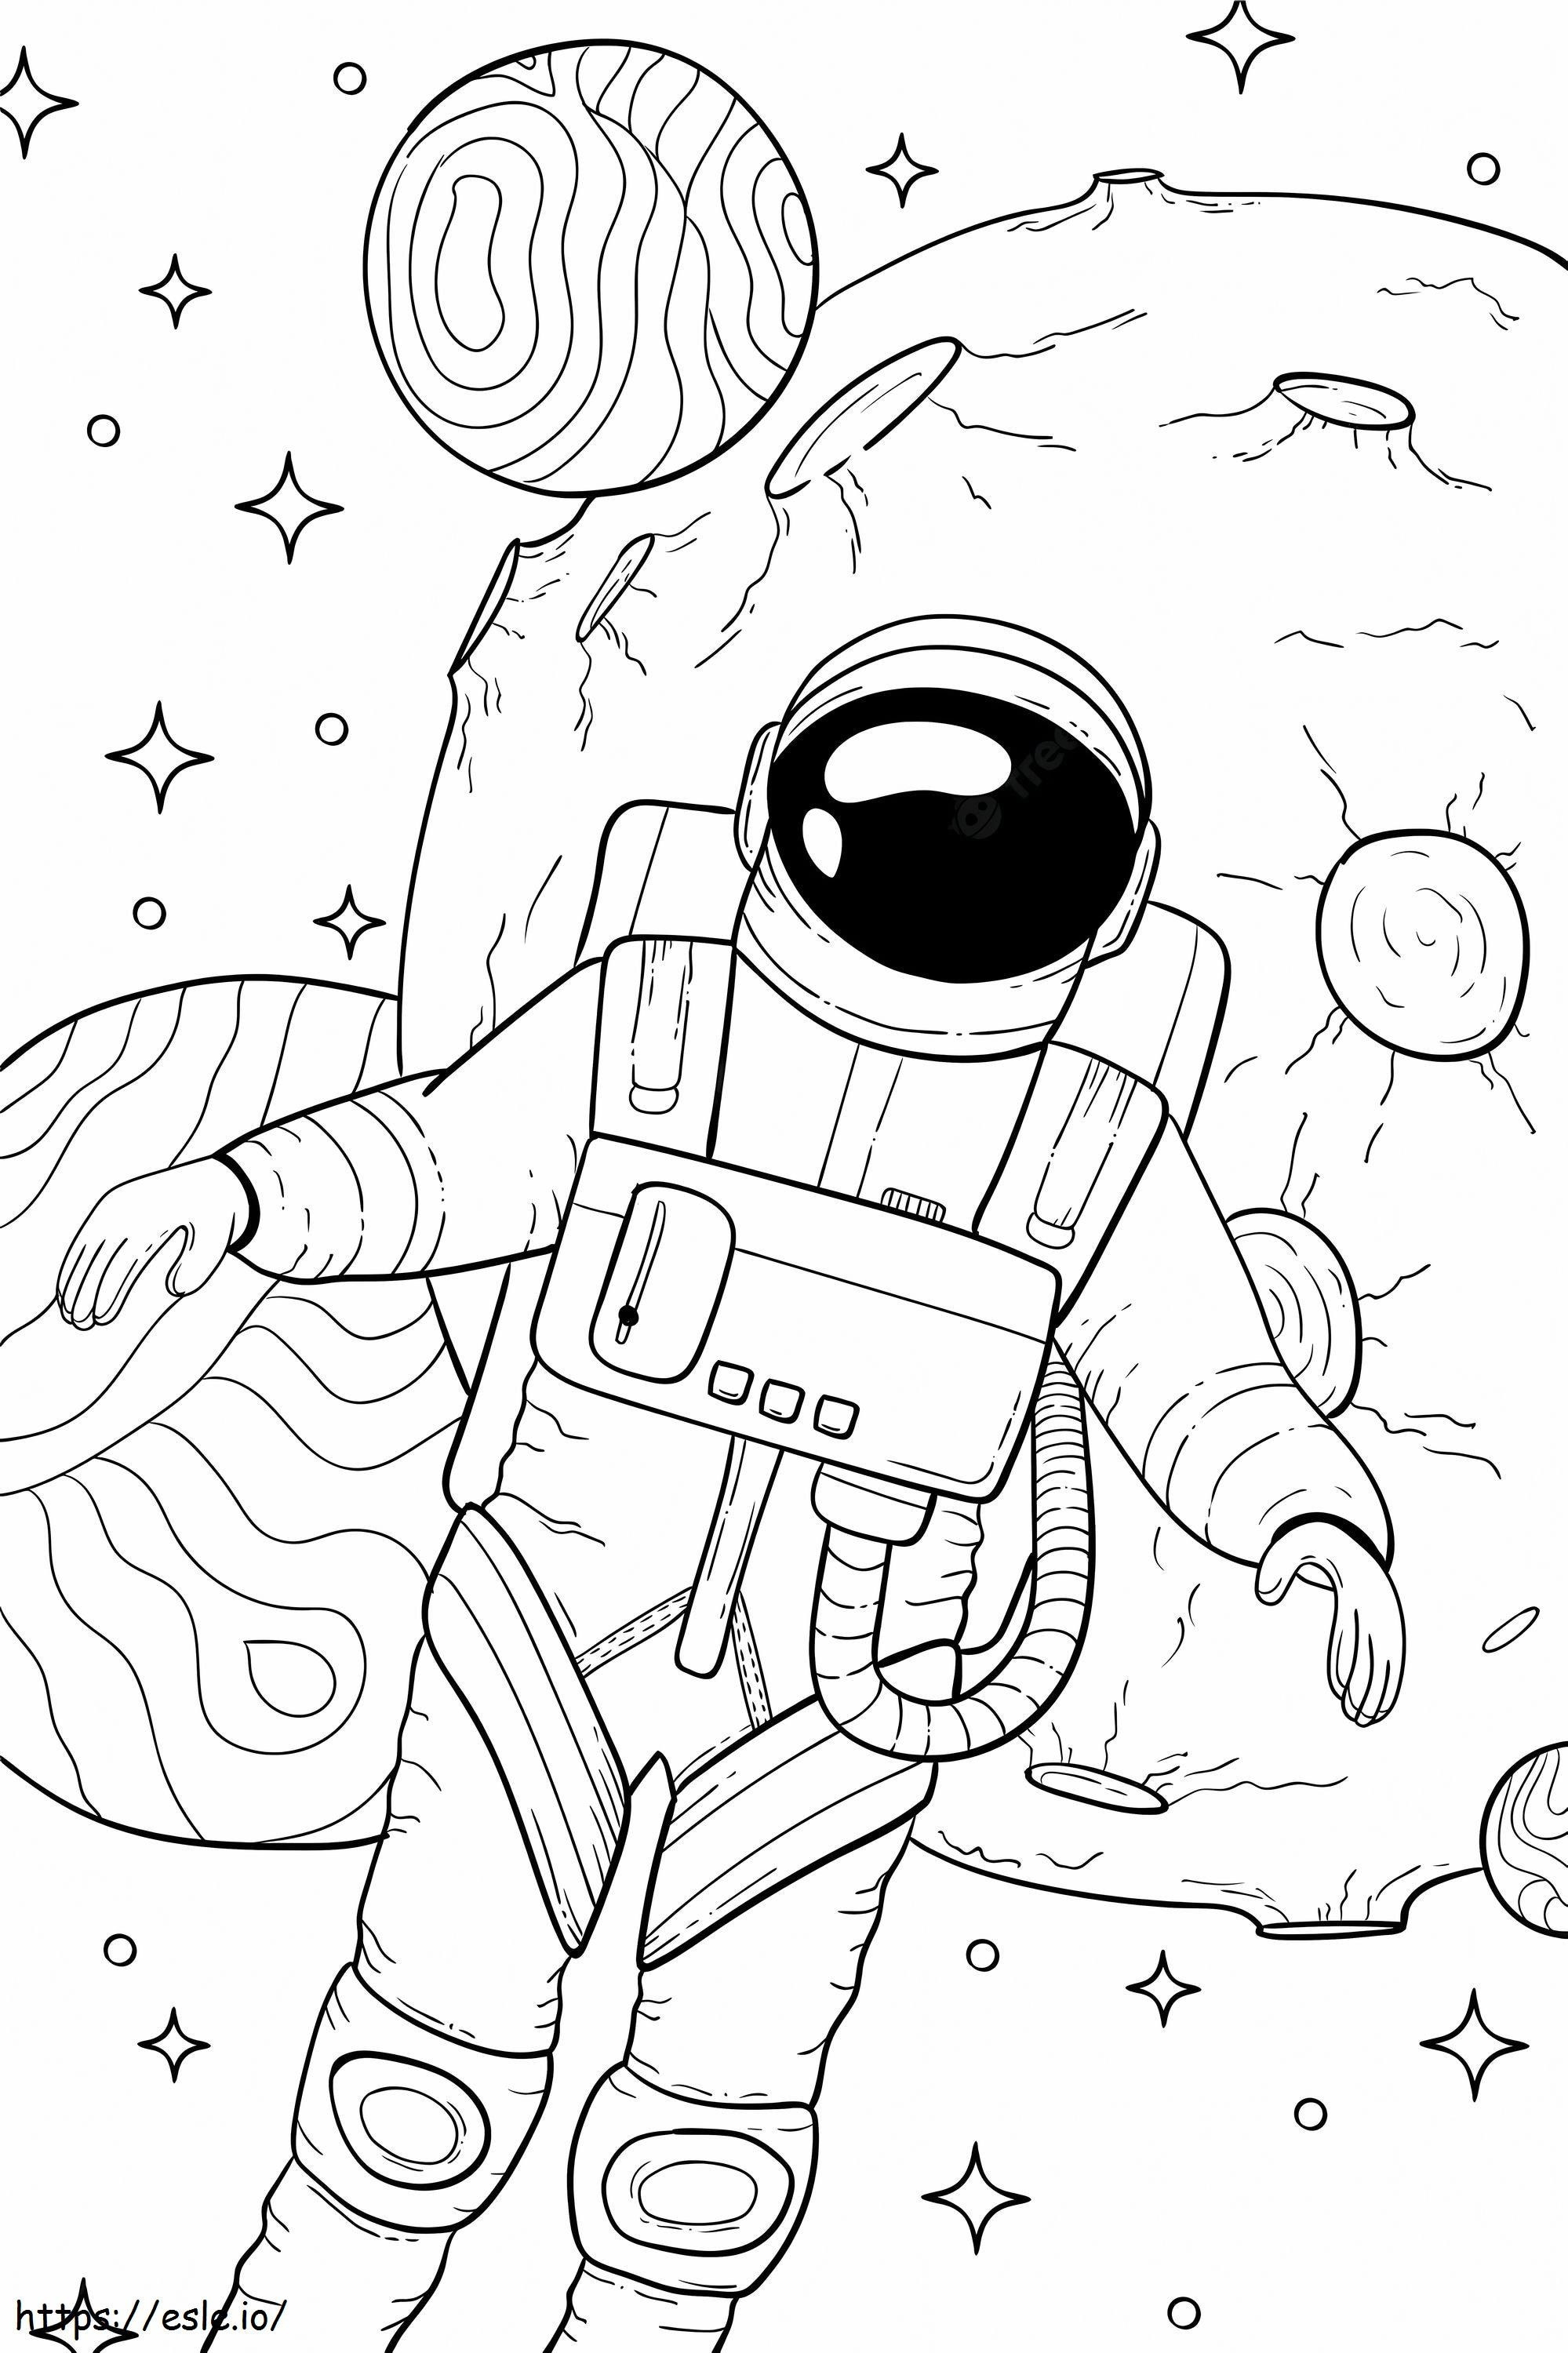 Cool Astronaut With Planets coloring page